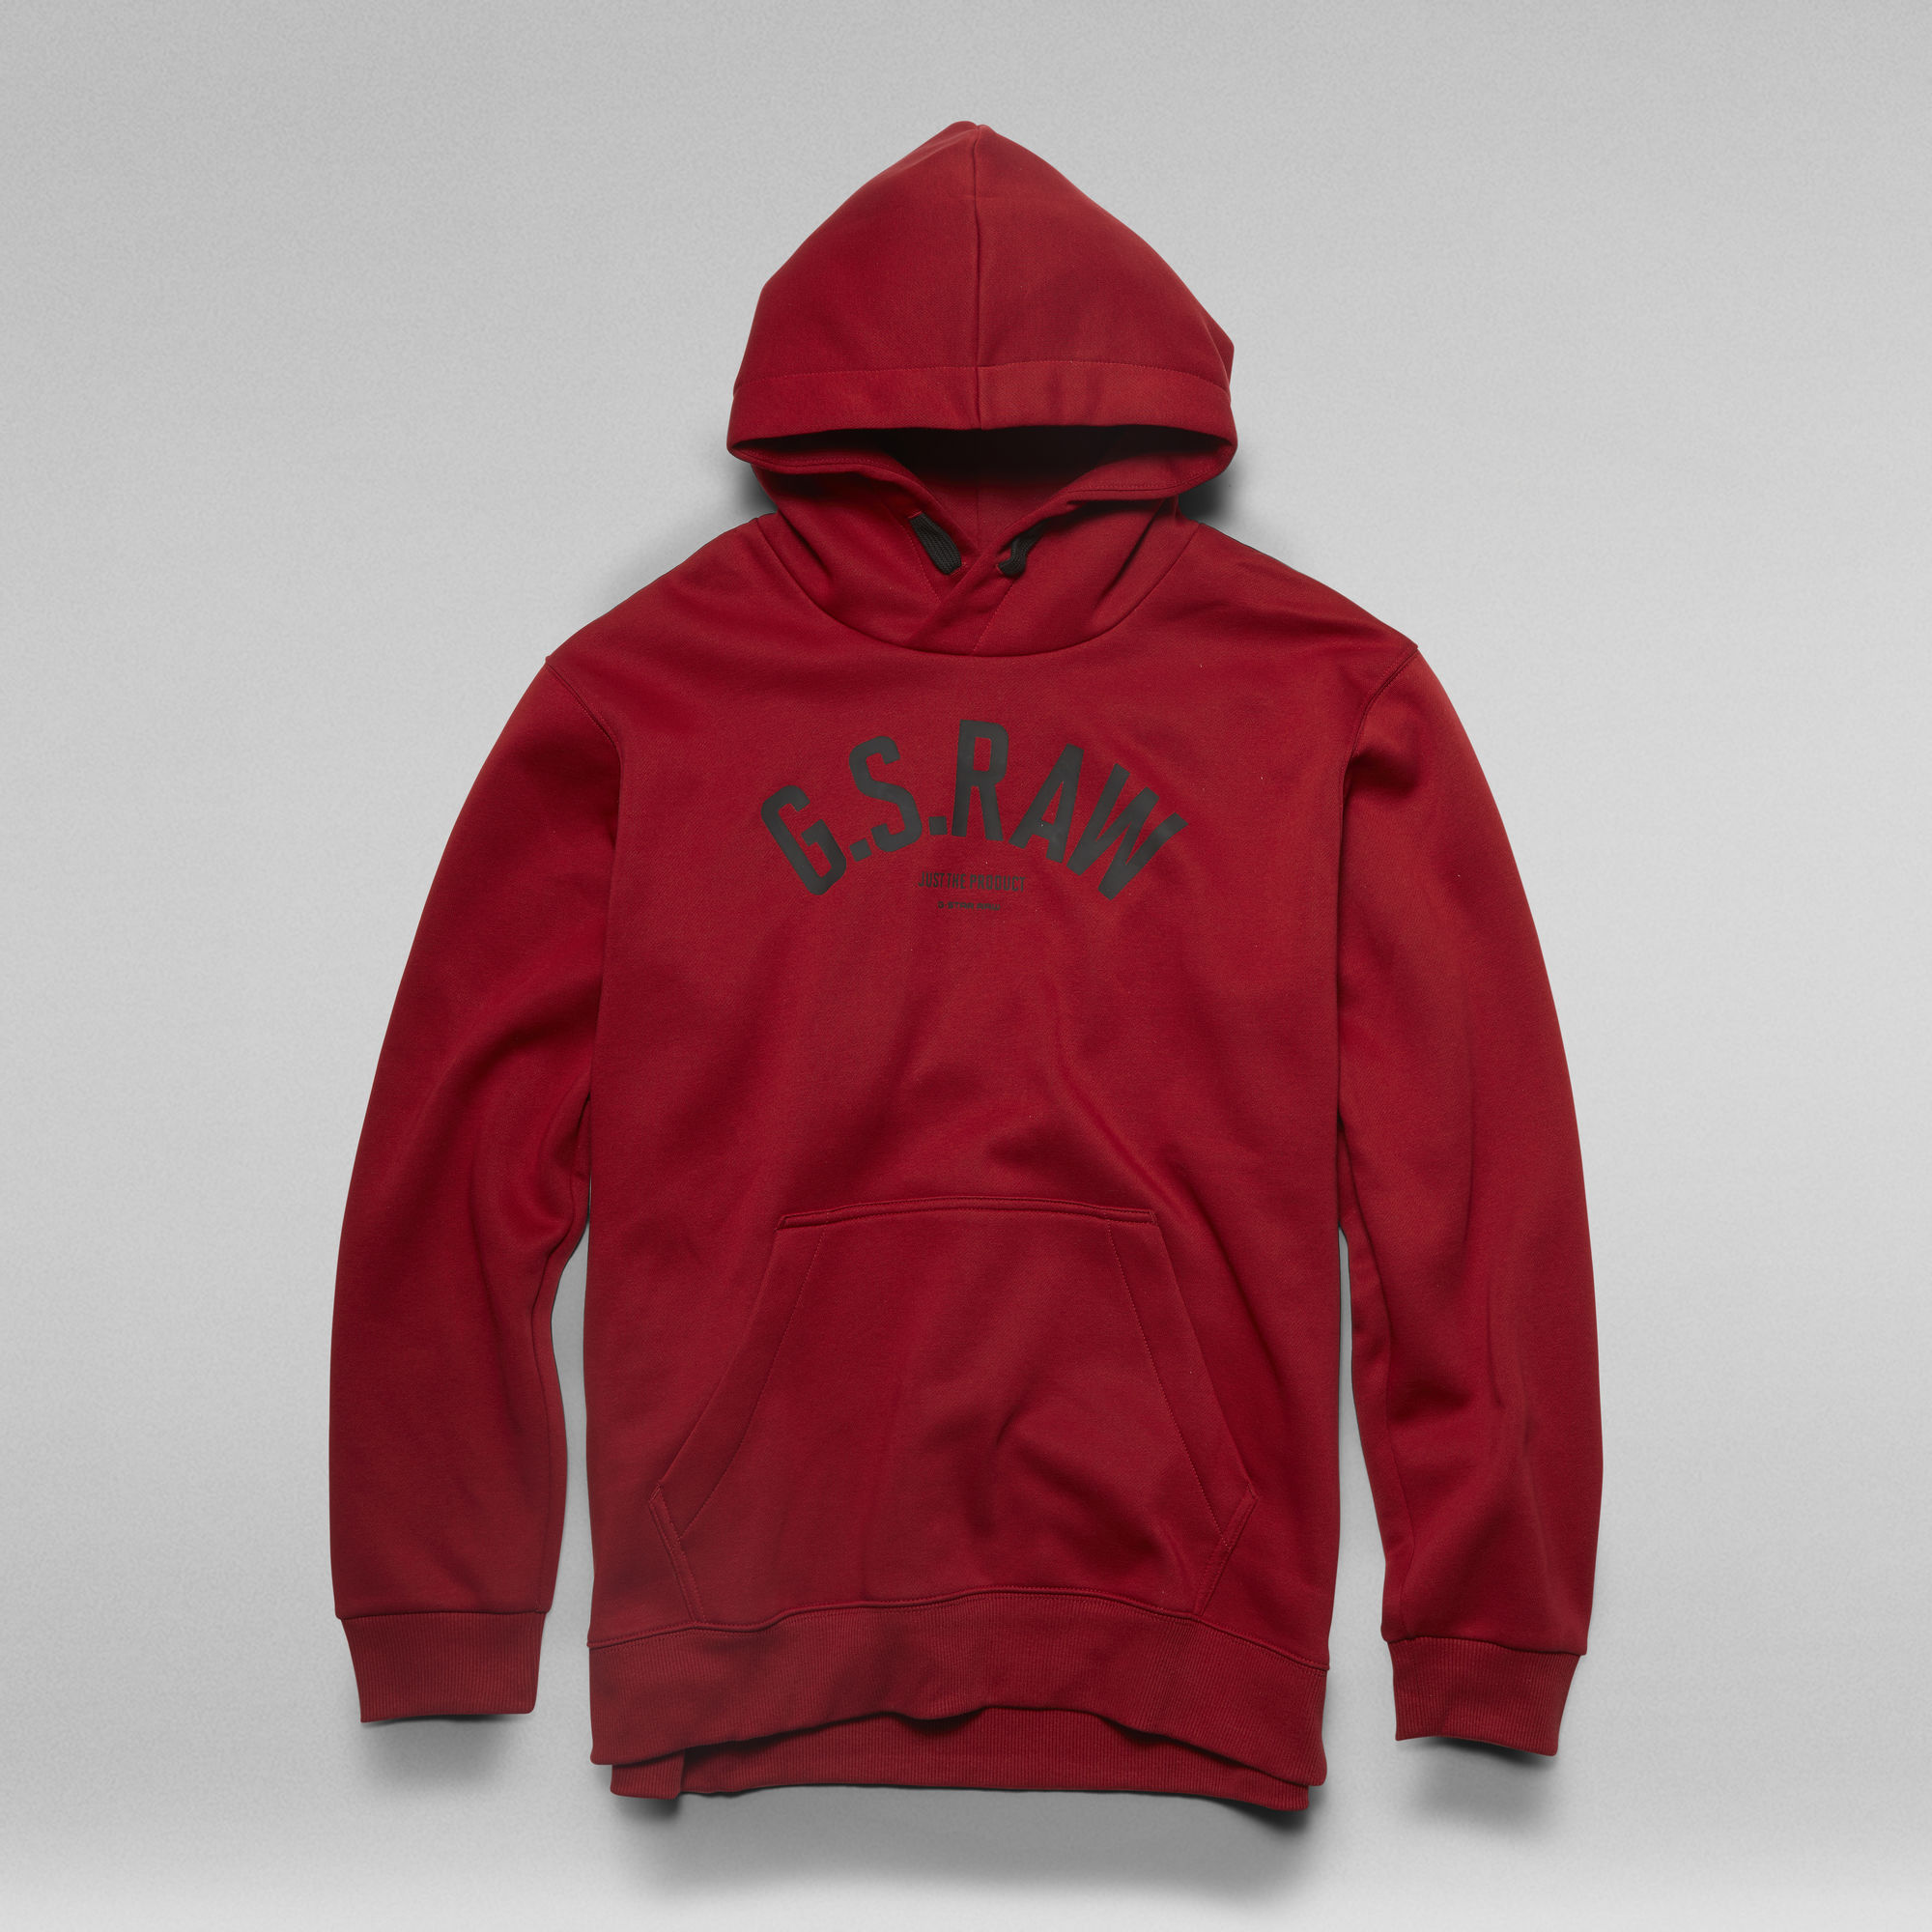 Loaq Graphic Hooded Sweater | Red | G-Star RAW®